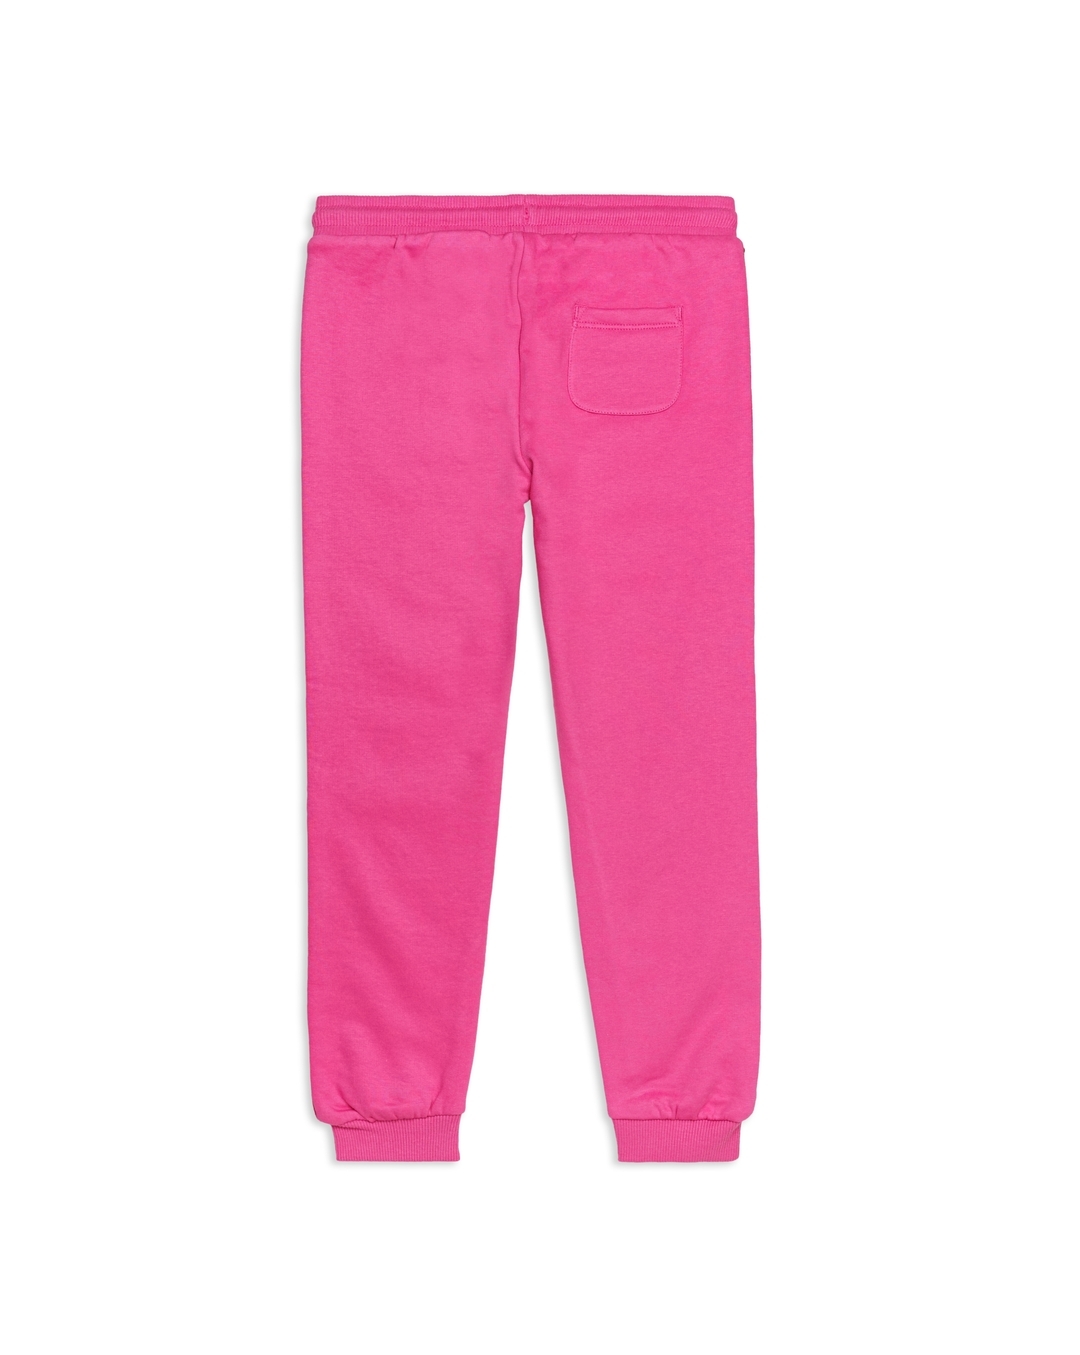 Buy Girls joggers -Pack of 1-PINK Online at Best Price